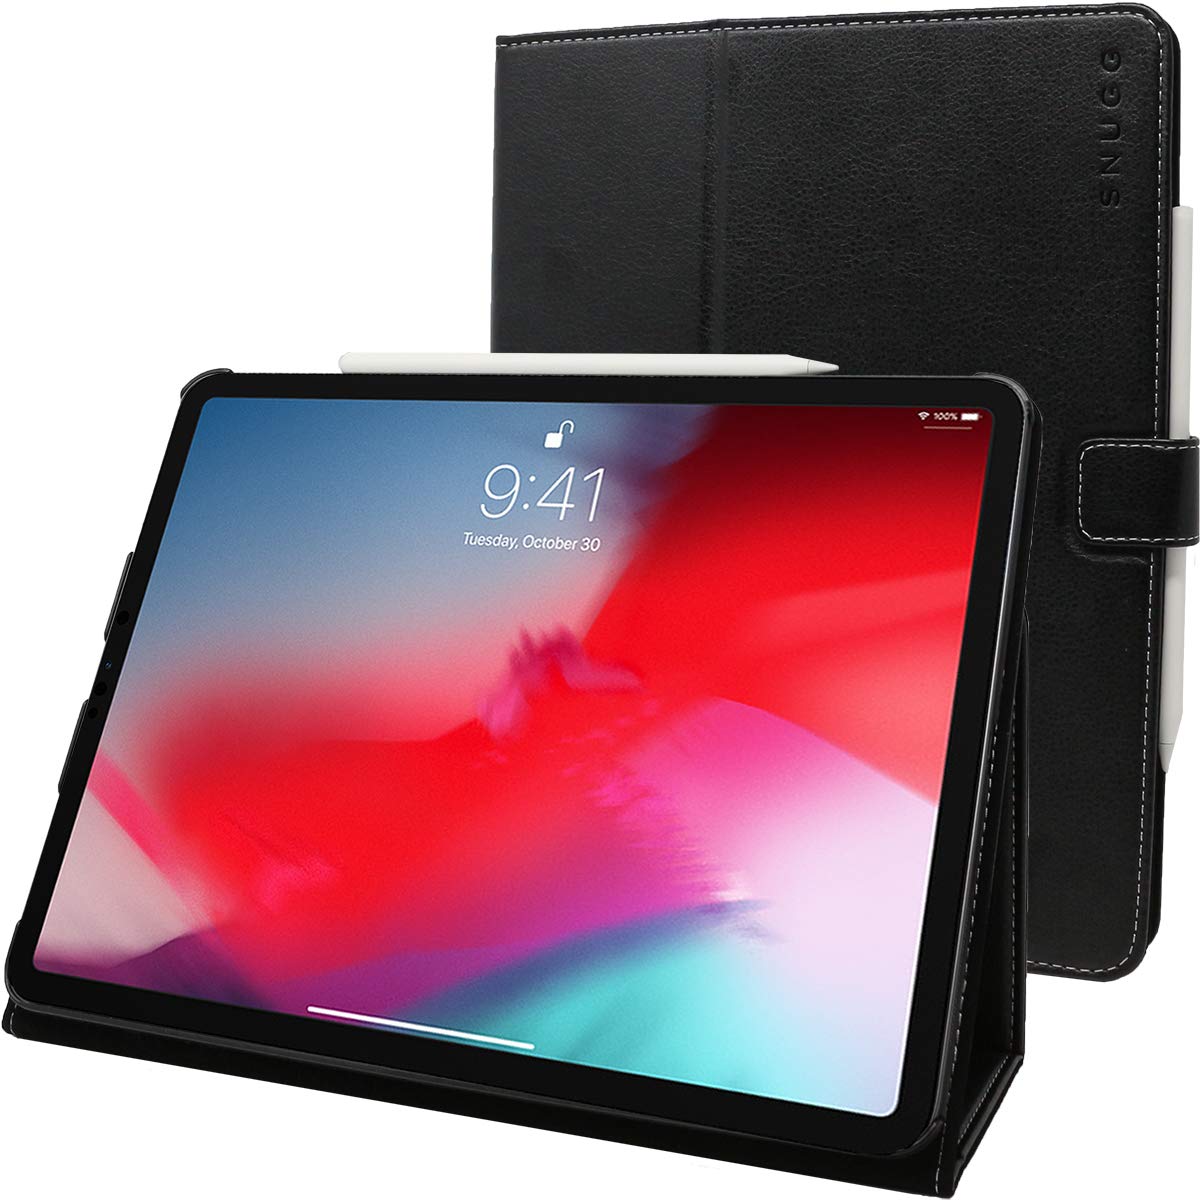 Leather Case for iPad Pro 11 inch Genuine Leather Smart Folio for 11-inch iPad Pro 11 Case with Pencil Holder Zipper Pocket Multifunctional iPad